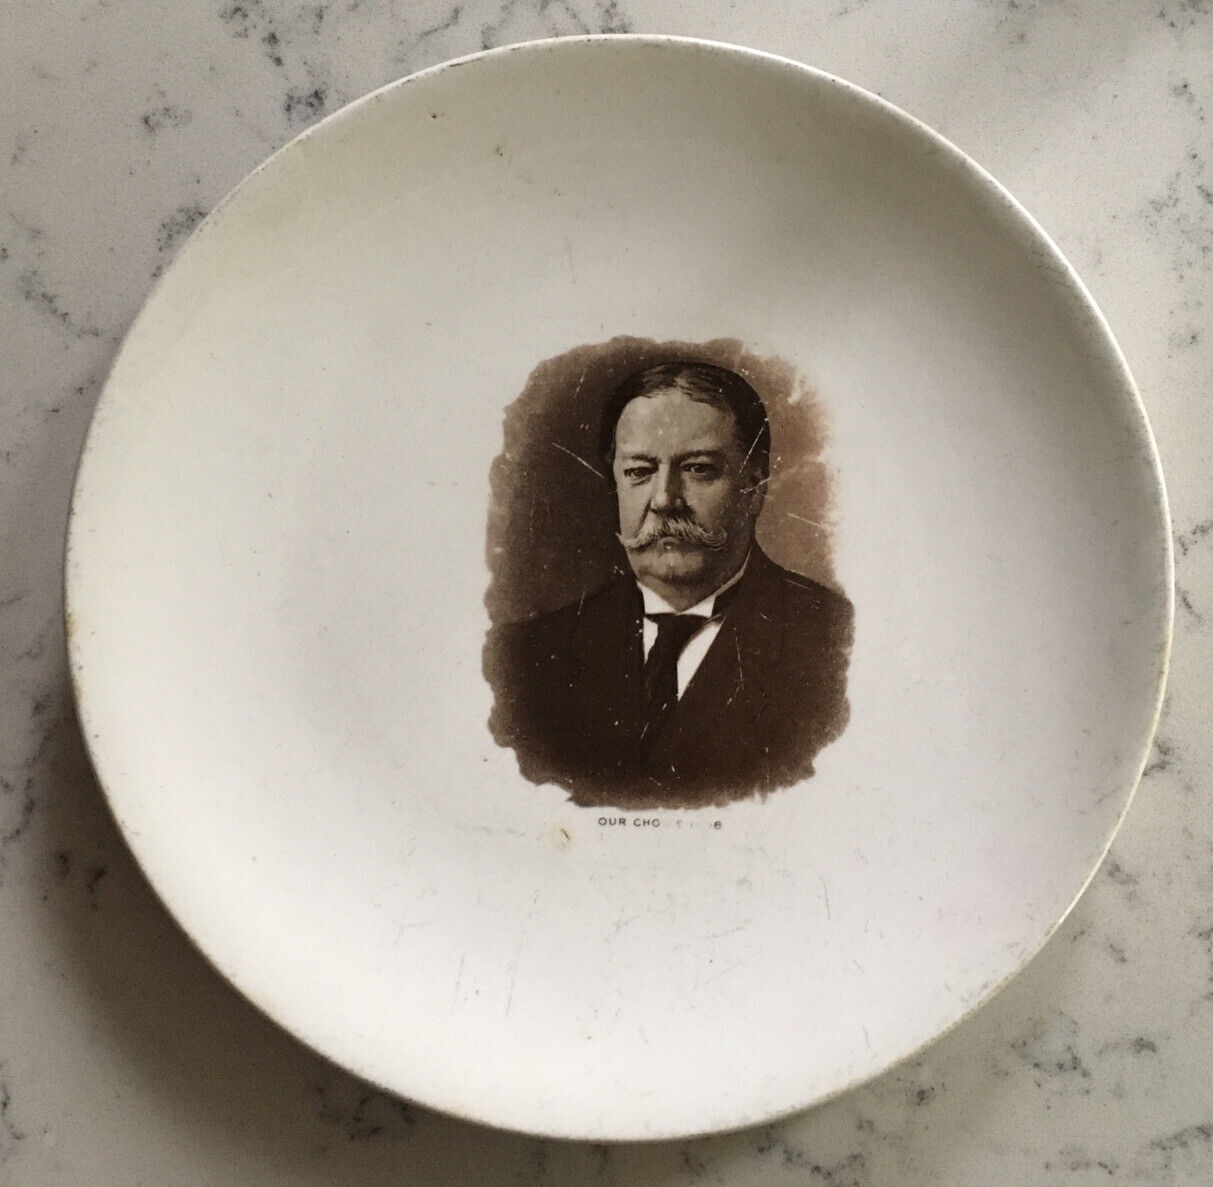 ANTIQUE WILLIAM HOWARD TAFT OUR CHOICE 1908 TRANSFER CAMPAIGN POLITICAL PLATE